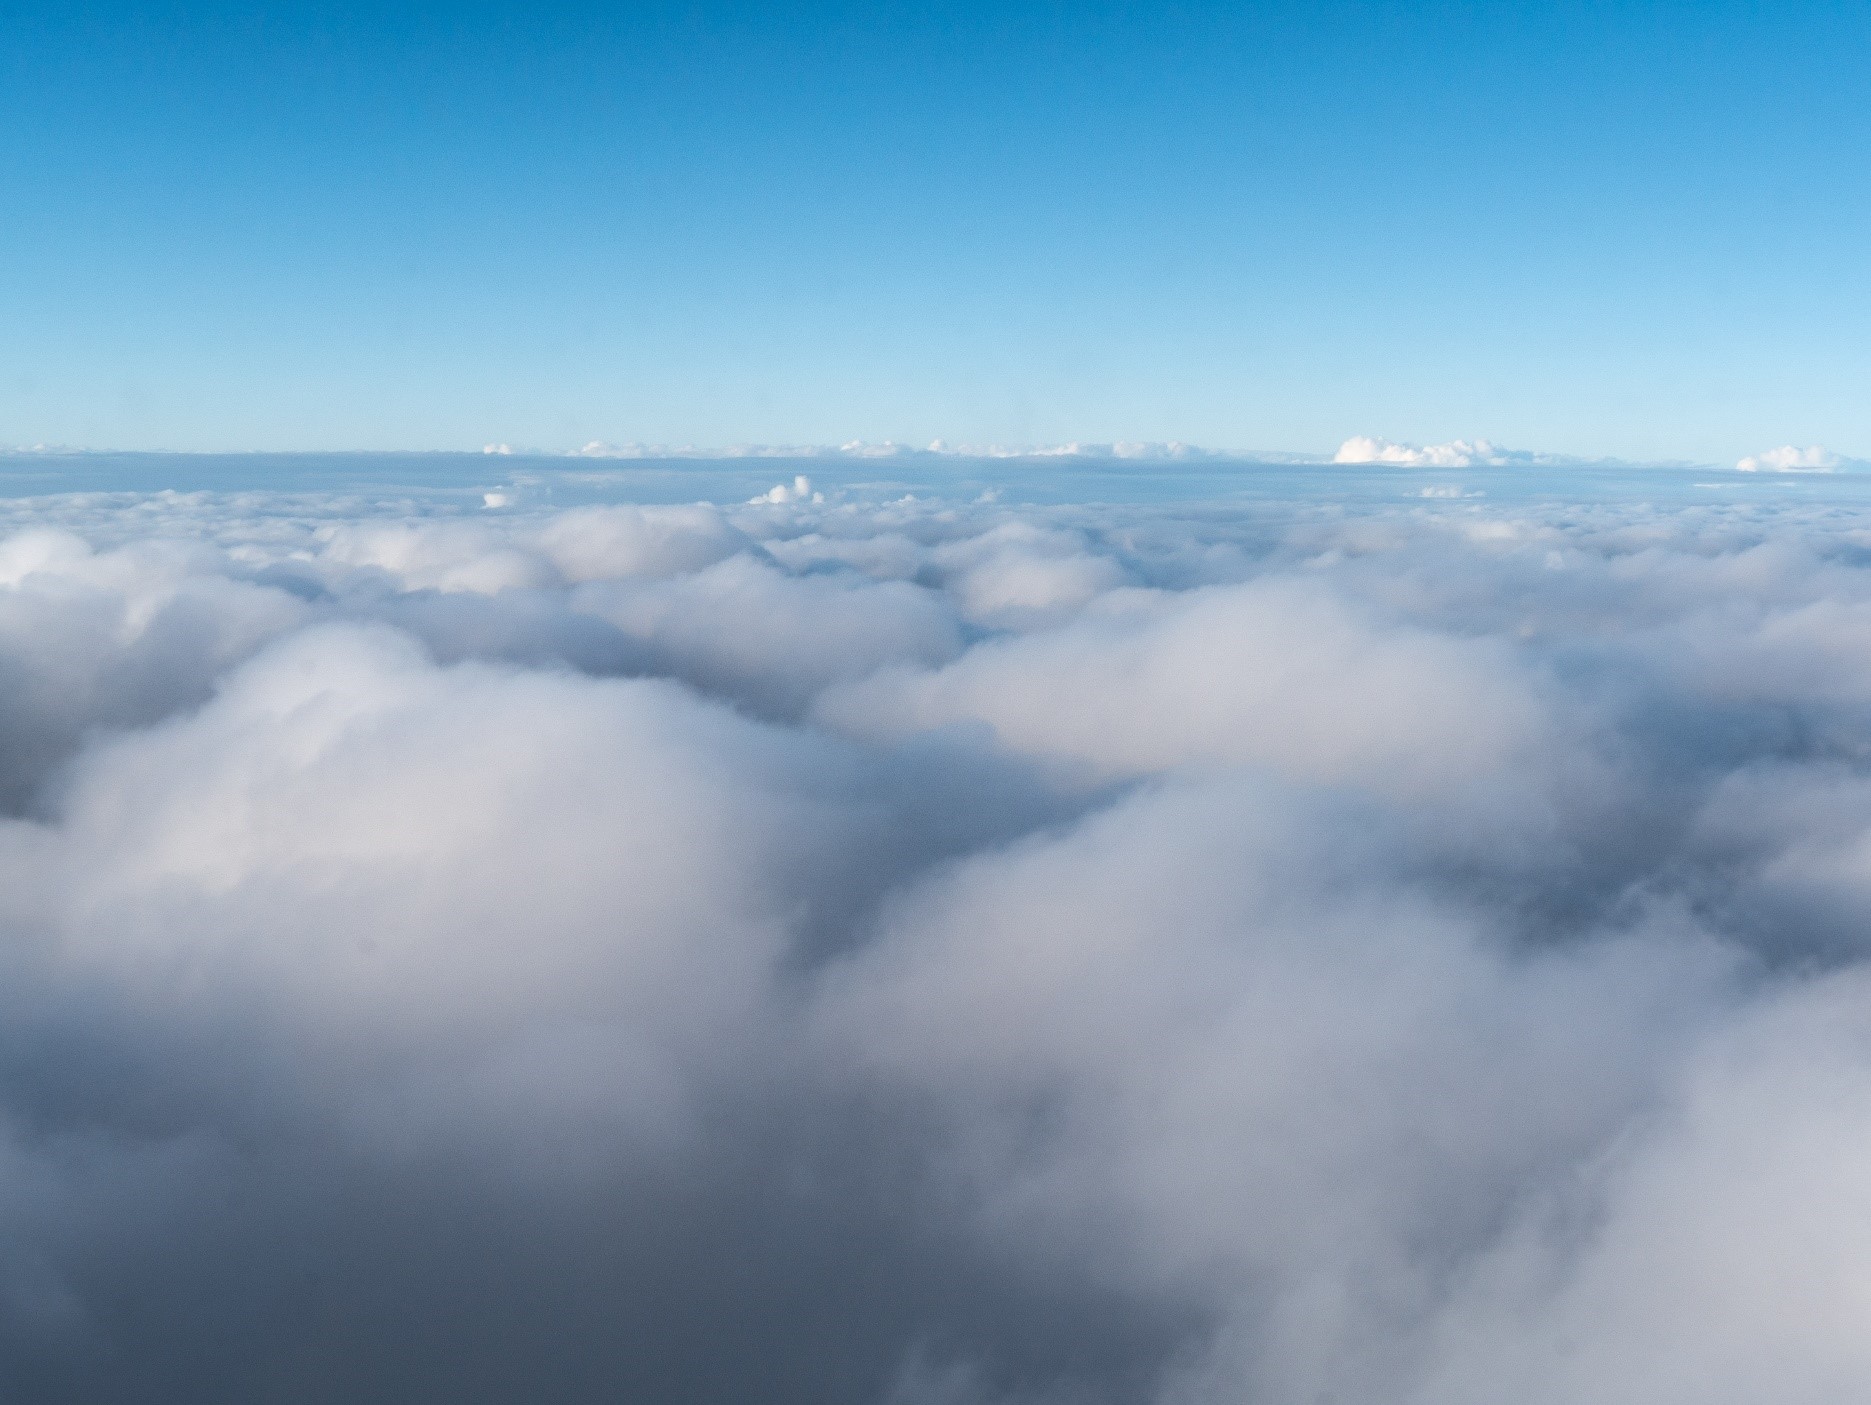 Aboard a NOAA research aircraft, Feingold snapped this high-altitude vista during the Atlantic Tradewind Ocean-Atmosphere Mesoscale Interaction Campaign (ATOMIC) over the Tropical North Atlantic Ocean near Barbados. “We were skimming the cloud tops,” he says. 